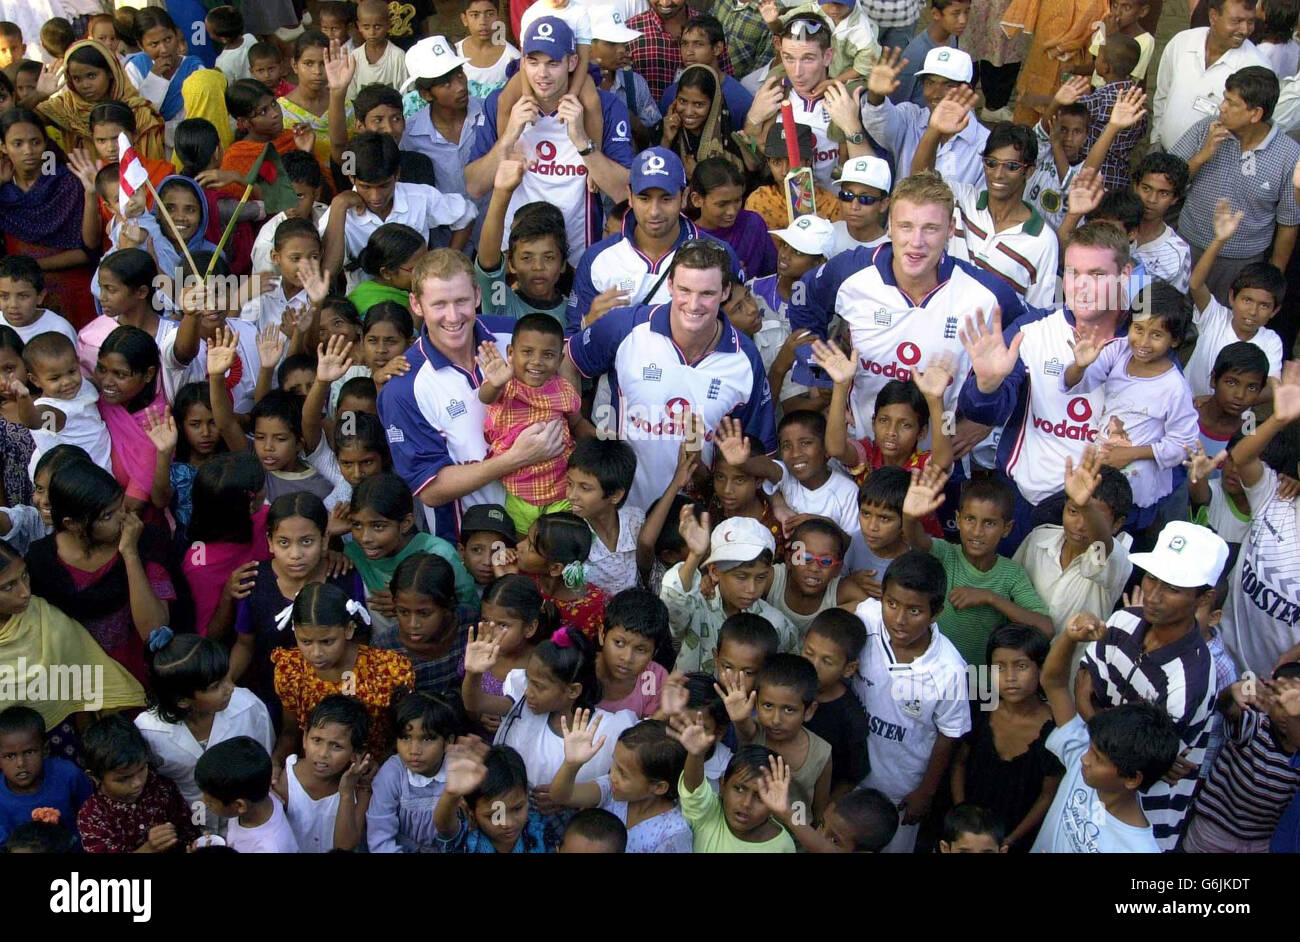 England one day international players (from left to right) Anthony McGrath, James Anderson (top), Vikram Solanki, Andrew Strauss, James Kirtley (top), Andrew Flintoff and Ian Blackwell are surrounded by local children from Sreepur Village in Bangladesh. The players who have arrived for the one-day international series against Bangladesh visit the village for 500 abandoned children and over 100 destitute women. Stock Photo